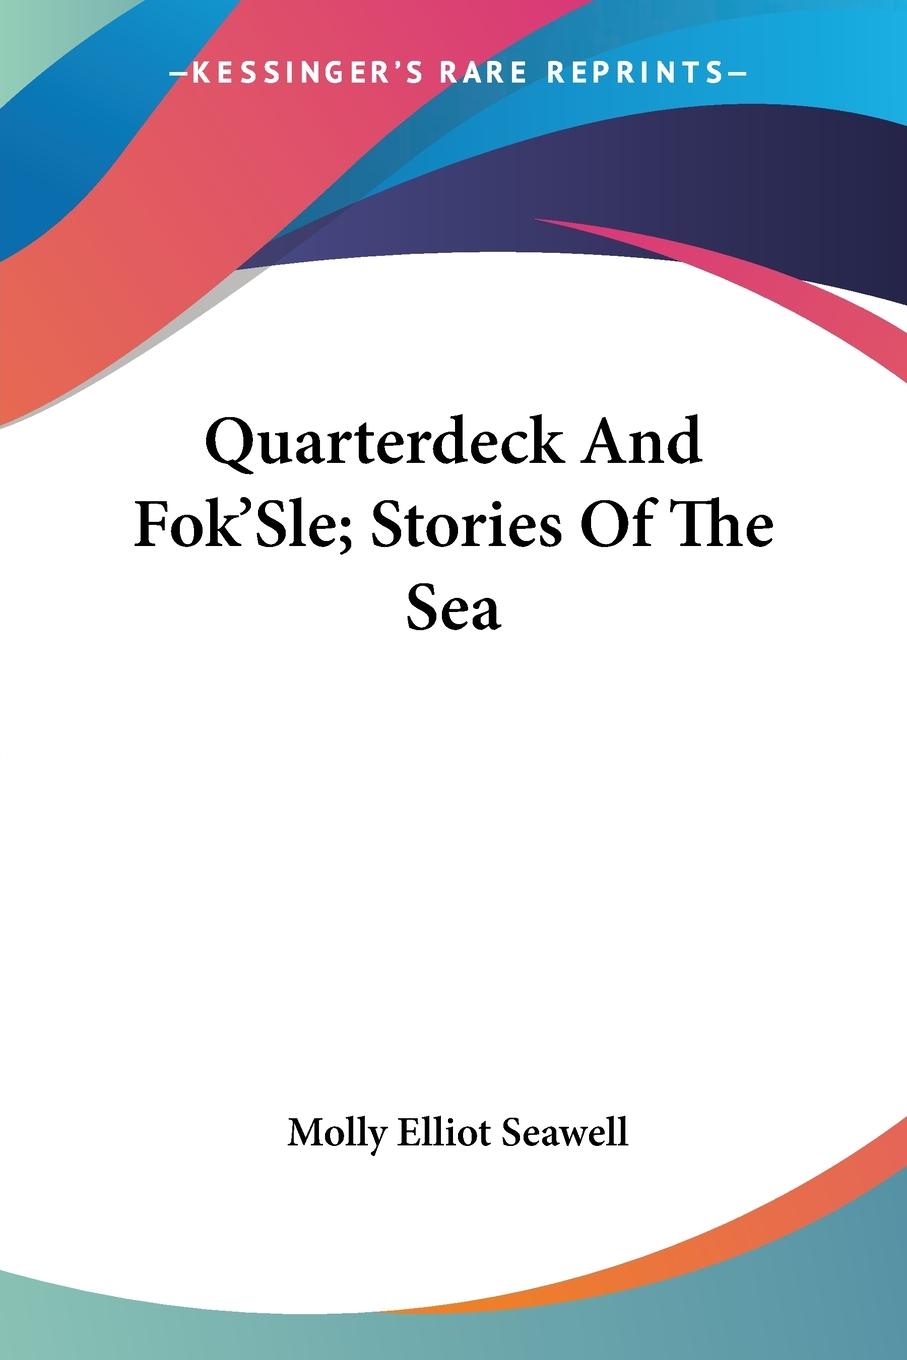 Quarterdeck And Fok Sle; Stories Of The Sea - Seawell, Molly Elliot